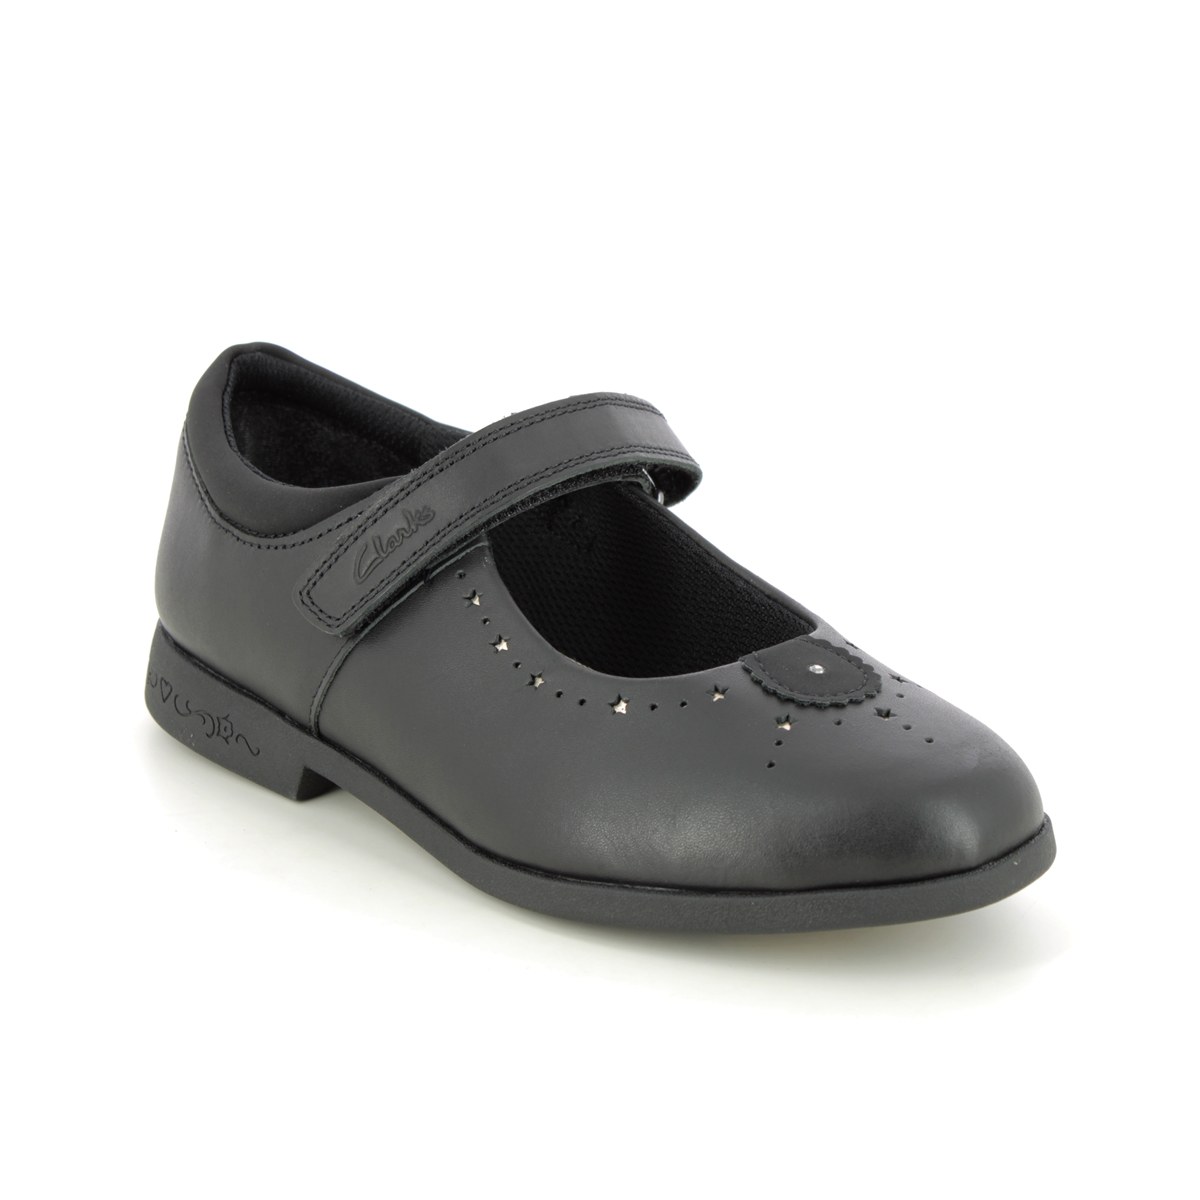 Clarks Magic Step Mj O Black leather Kids girls school shoes 6970-55E in a Plain Leather in Size 13.5